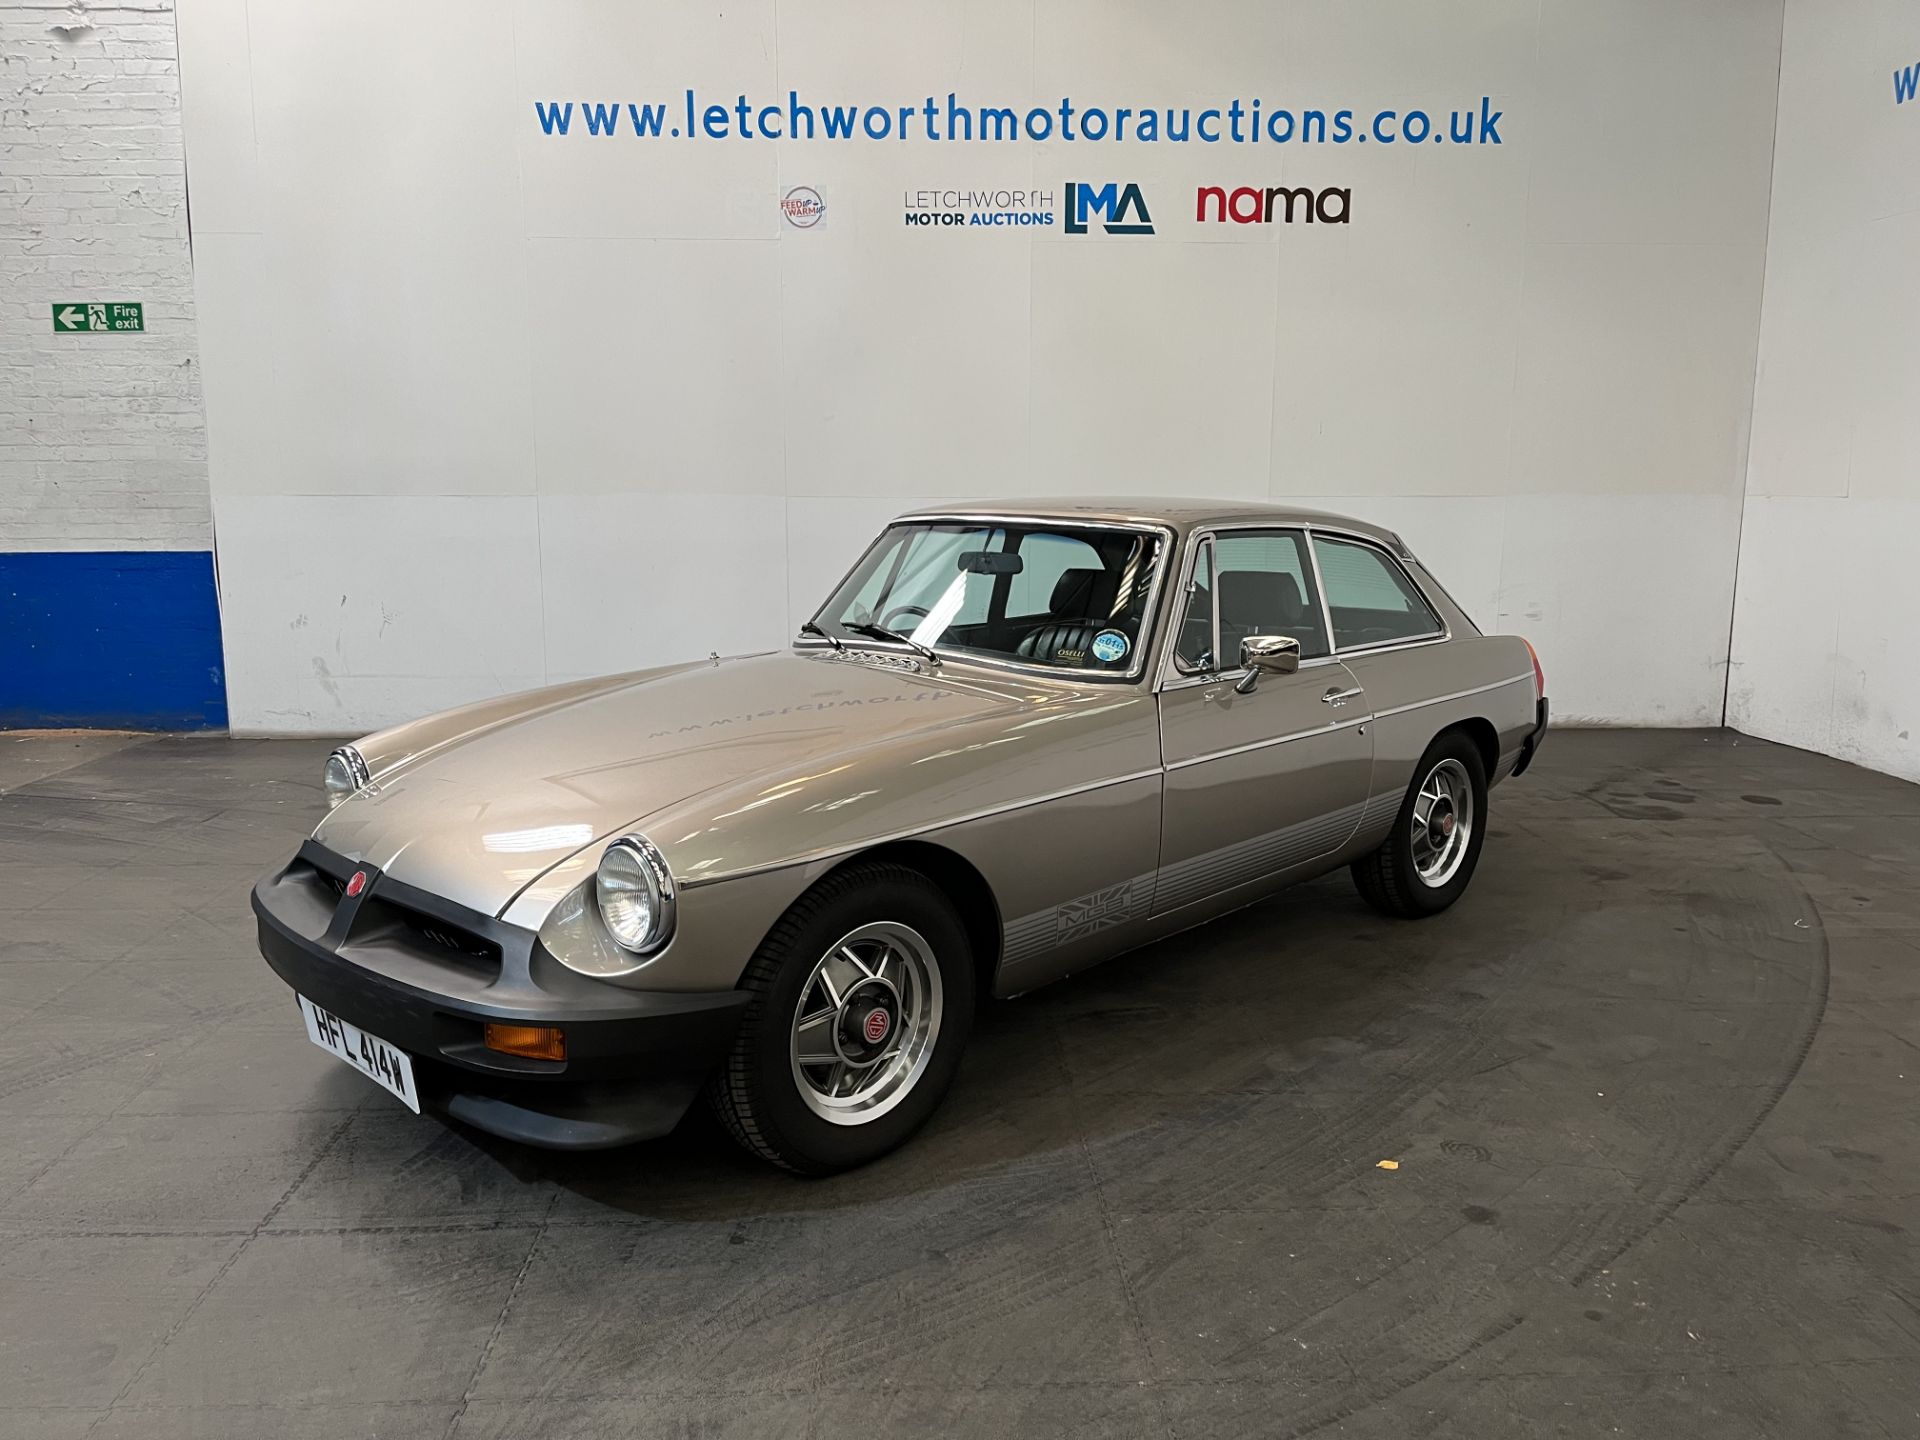 1981 MG B GT Limited Edition - 1798cc - Image 3 of 19